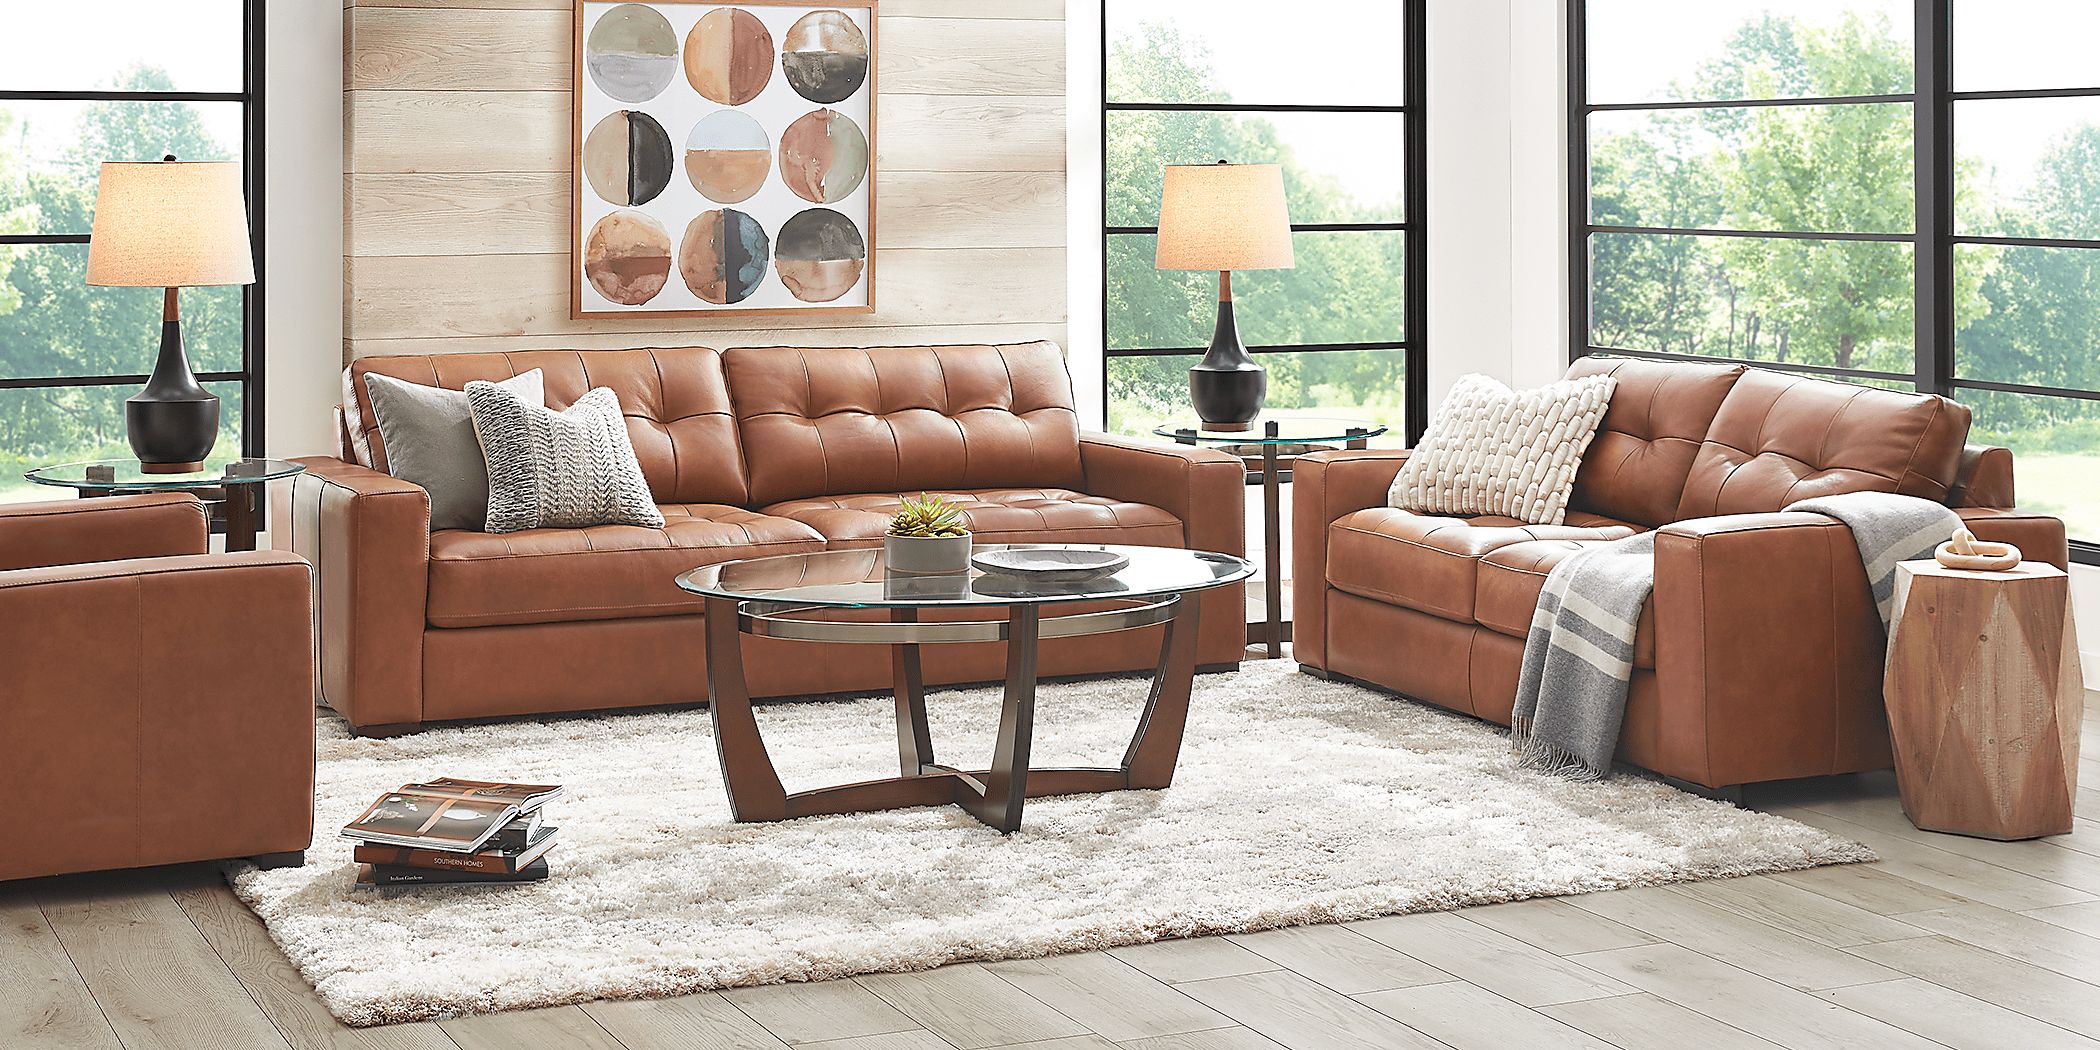 Messina Brown Leather 8 Pc Living Room